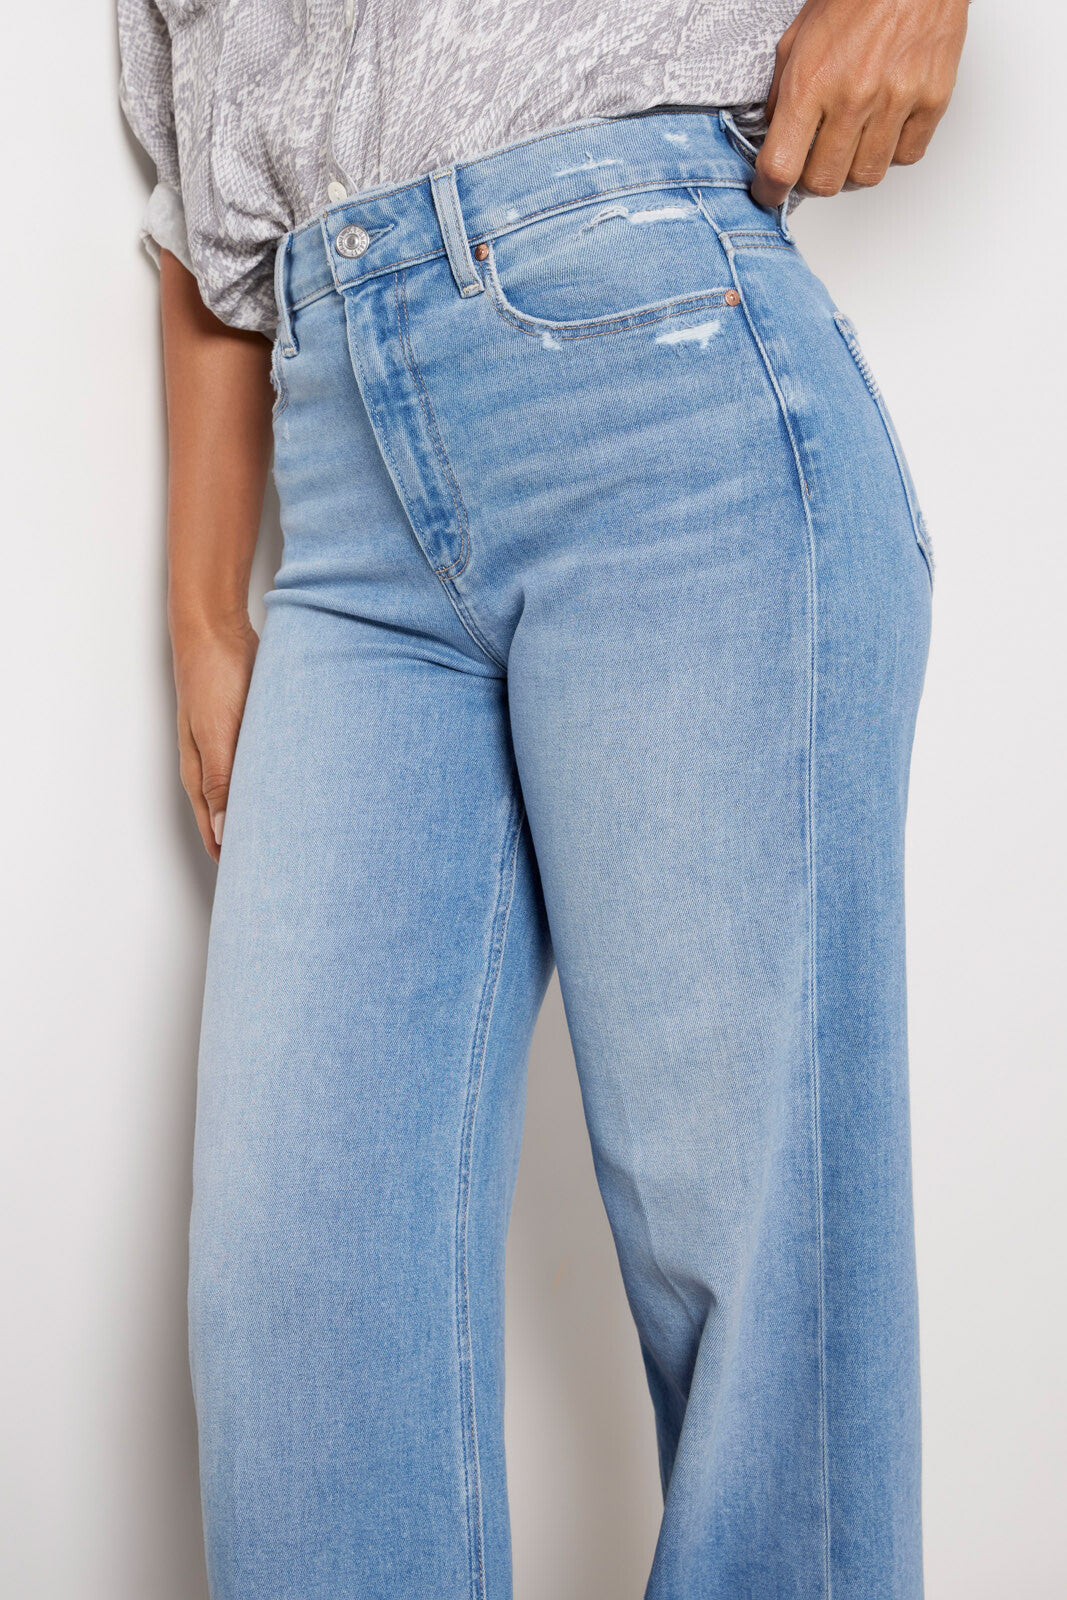 Pale wash raw hem jeans with a wide straight leg